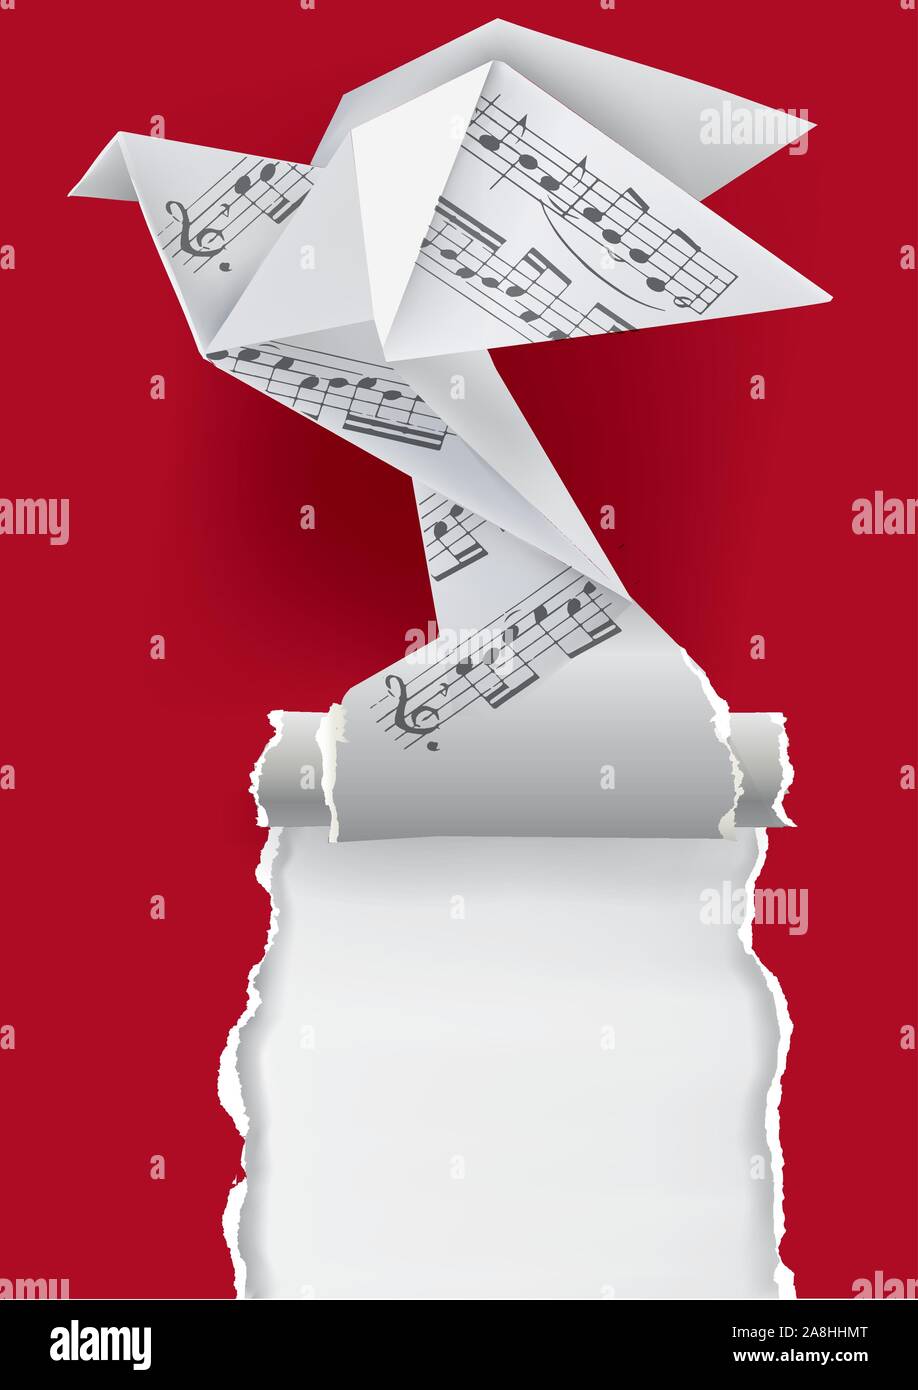 Origami dove with musical notes. Origami paper pigeon with musical notes ripping red paper background. Tamplate for musical poster. Vector available. Stock Vector